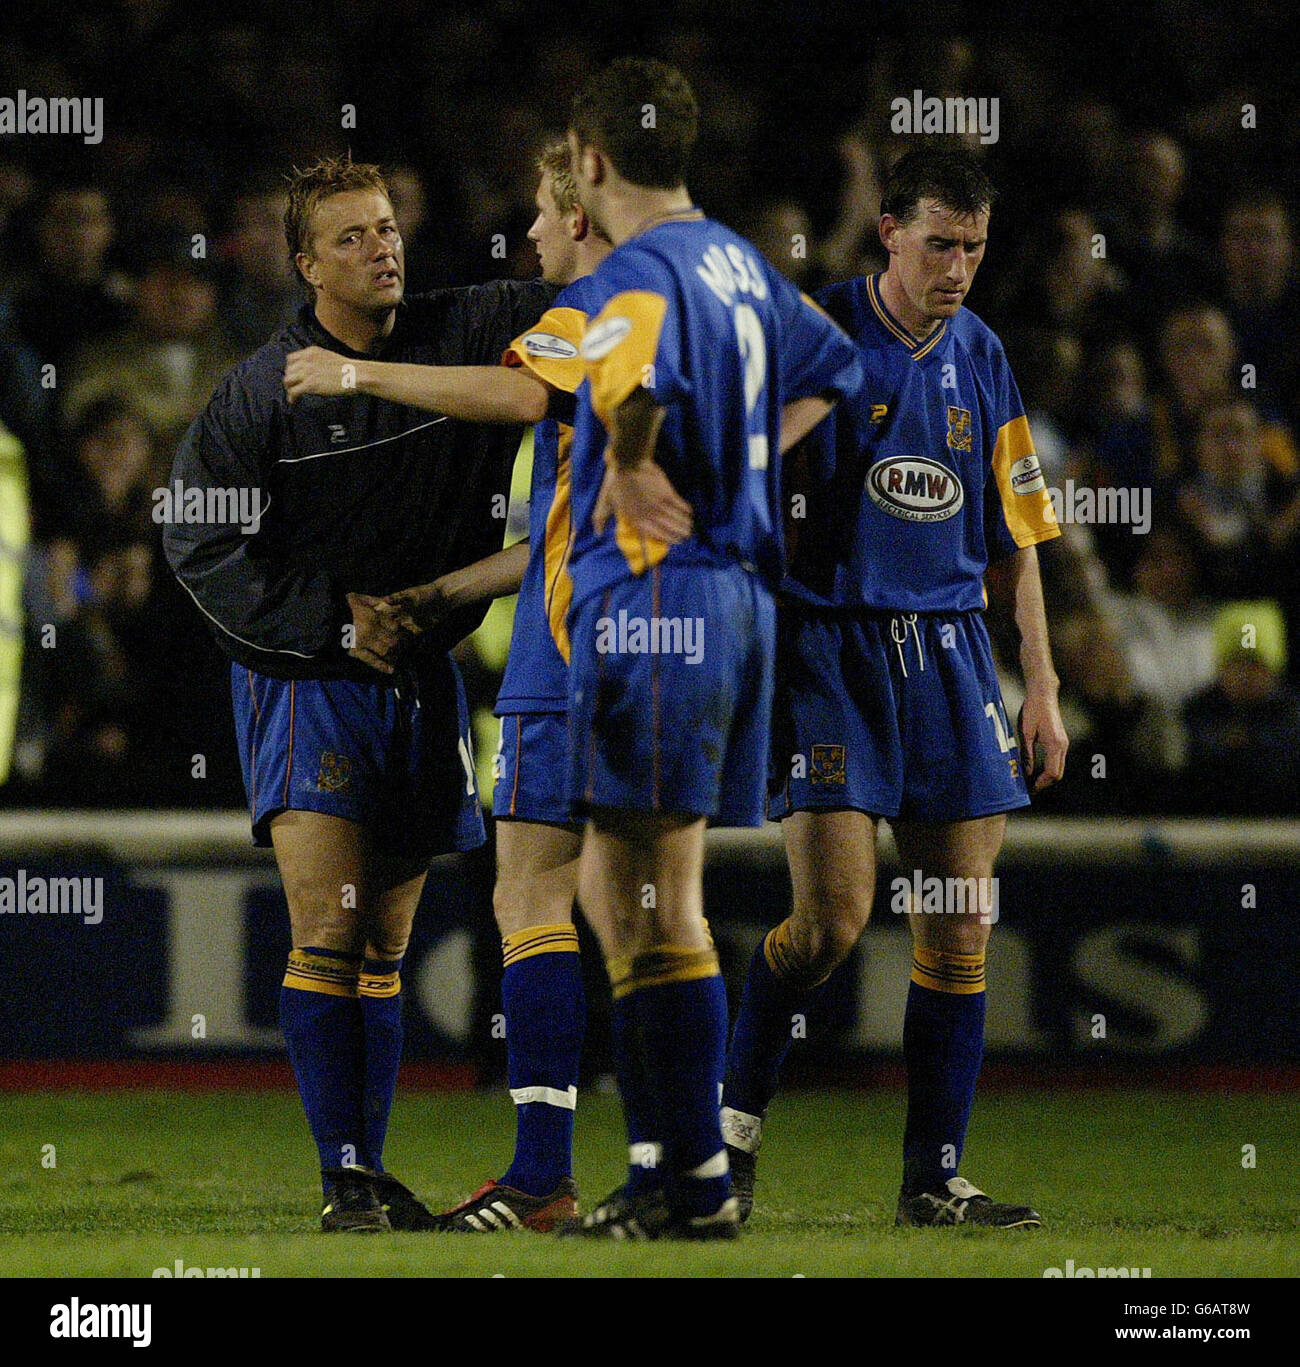 Dejected Shrewsbury Town captain Nigel Jemson (left) hugs Jamie Tolly (centre) as Peter Wilding looks sadly to the ground (right) after they lost 3 - 2 against Carlisle United and were relegated into Confrence football, during the Nationwide Divison Three game at Gay Meadow, Shrewsbury. NO UNOFFICIAL CLUB WEBSITE USE. Stock Photo